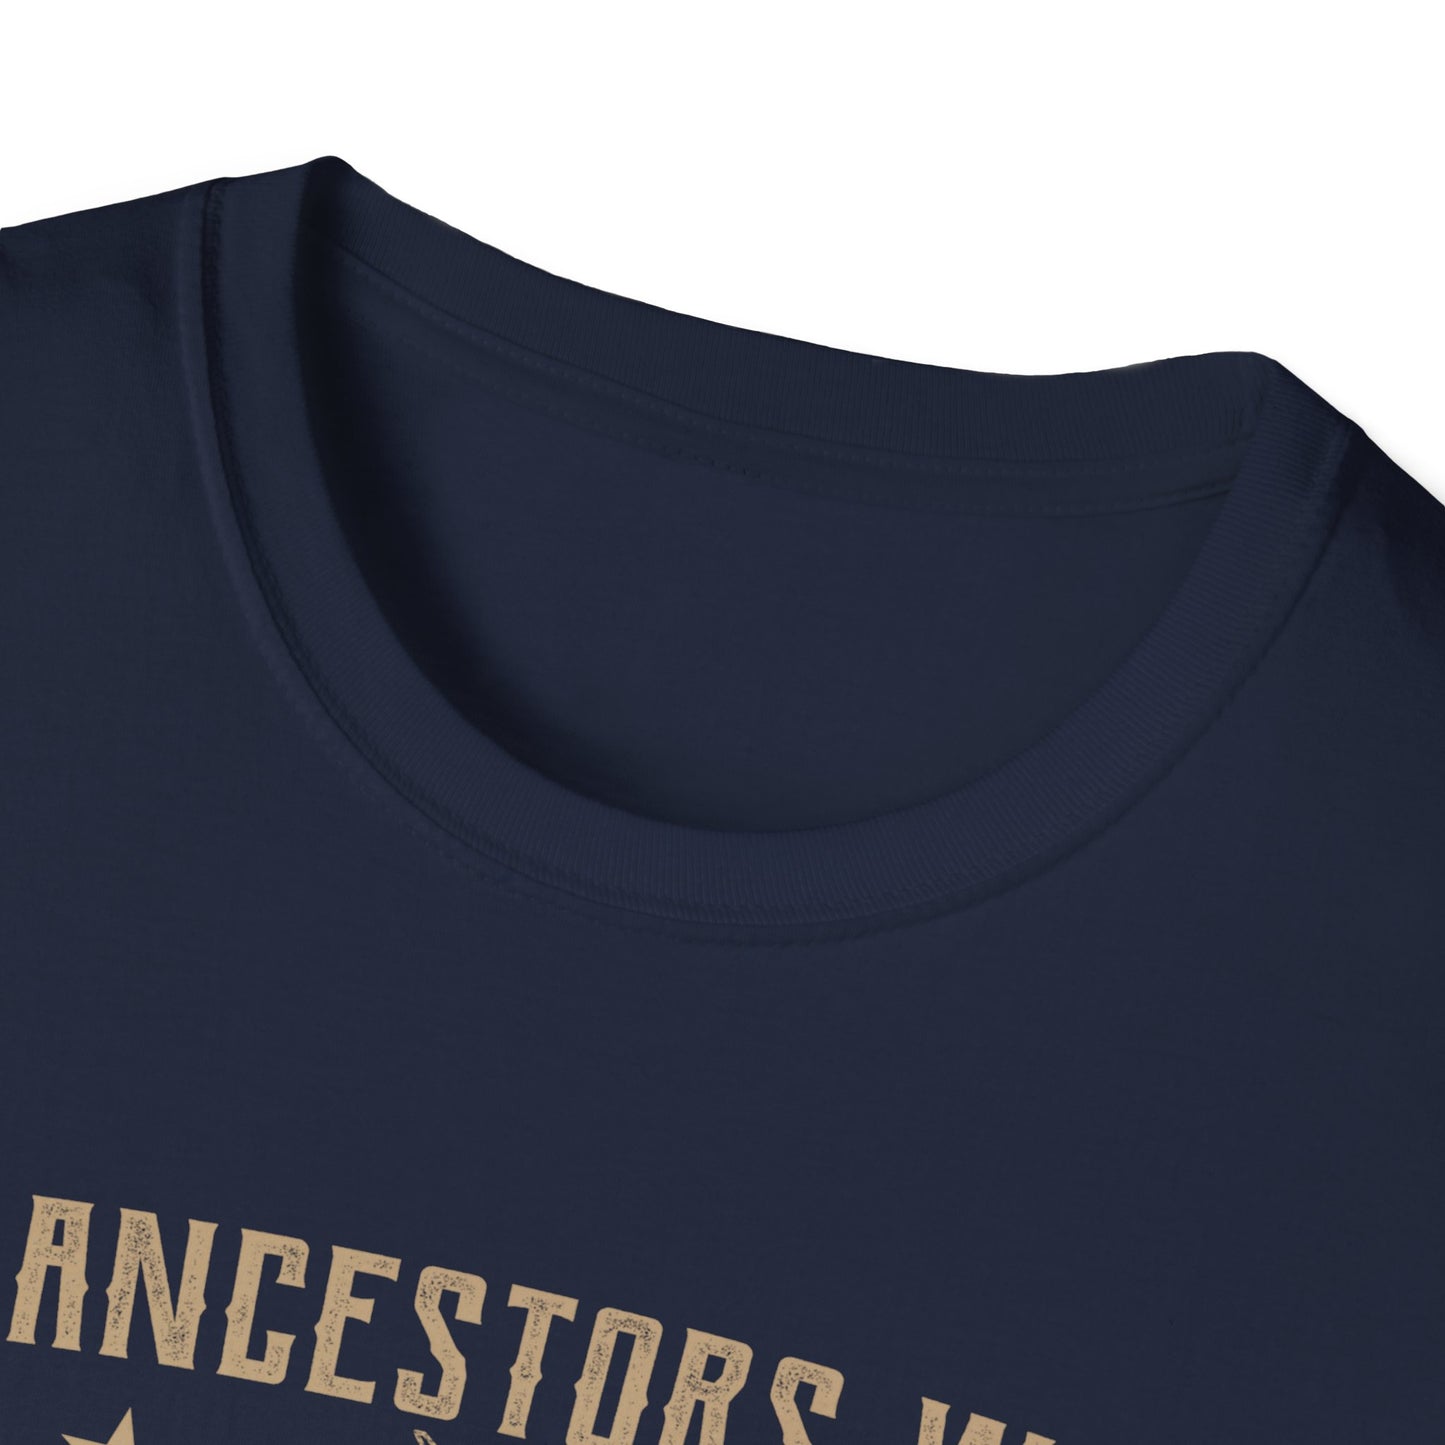 My Ancestors Were Vikings What's Your Excuse T-Shirt